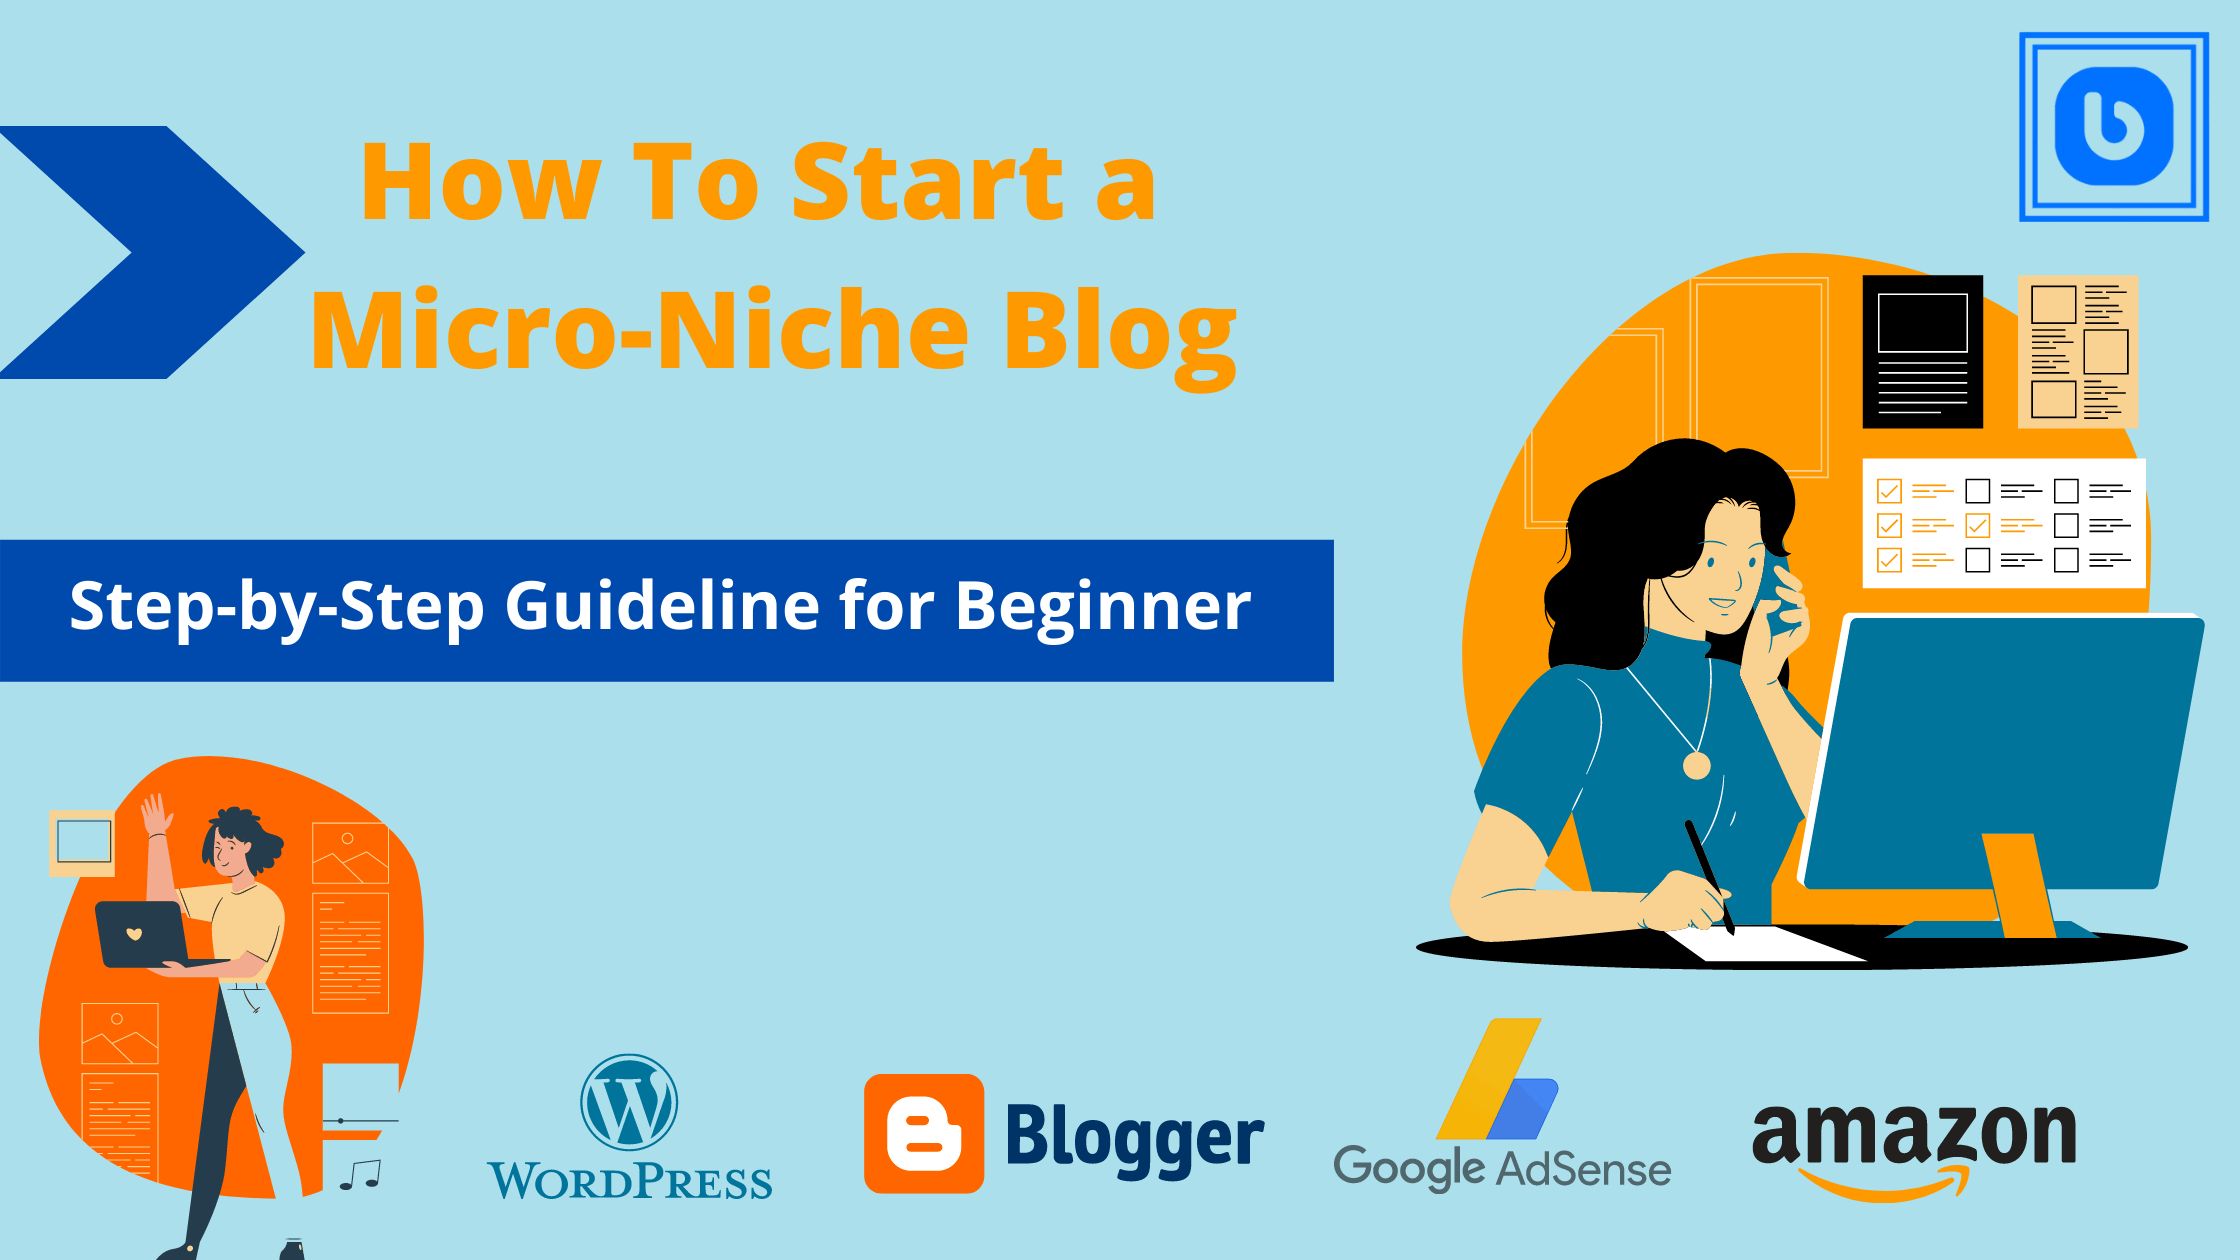 How to start a micro-niche blog